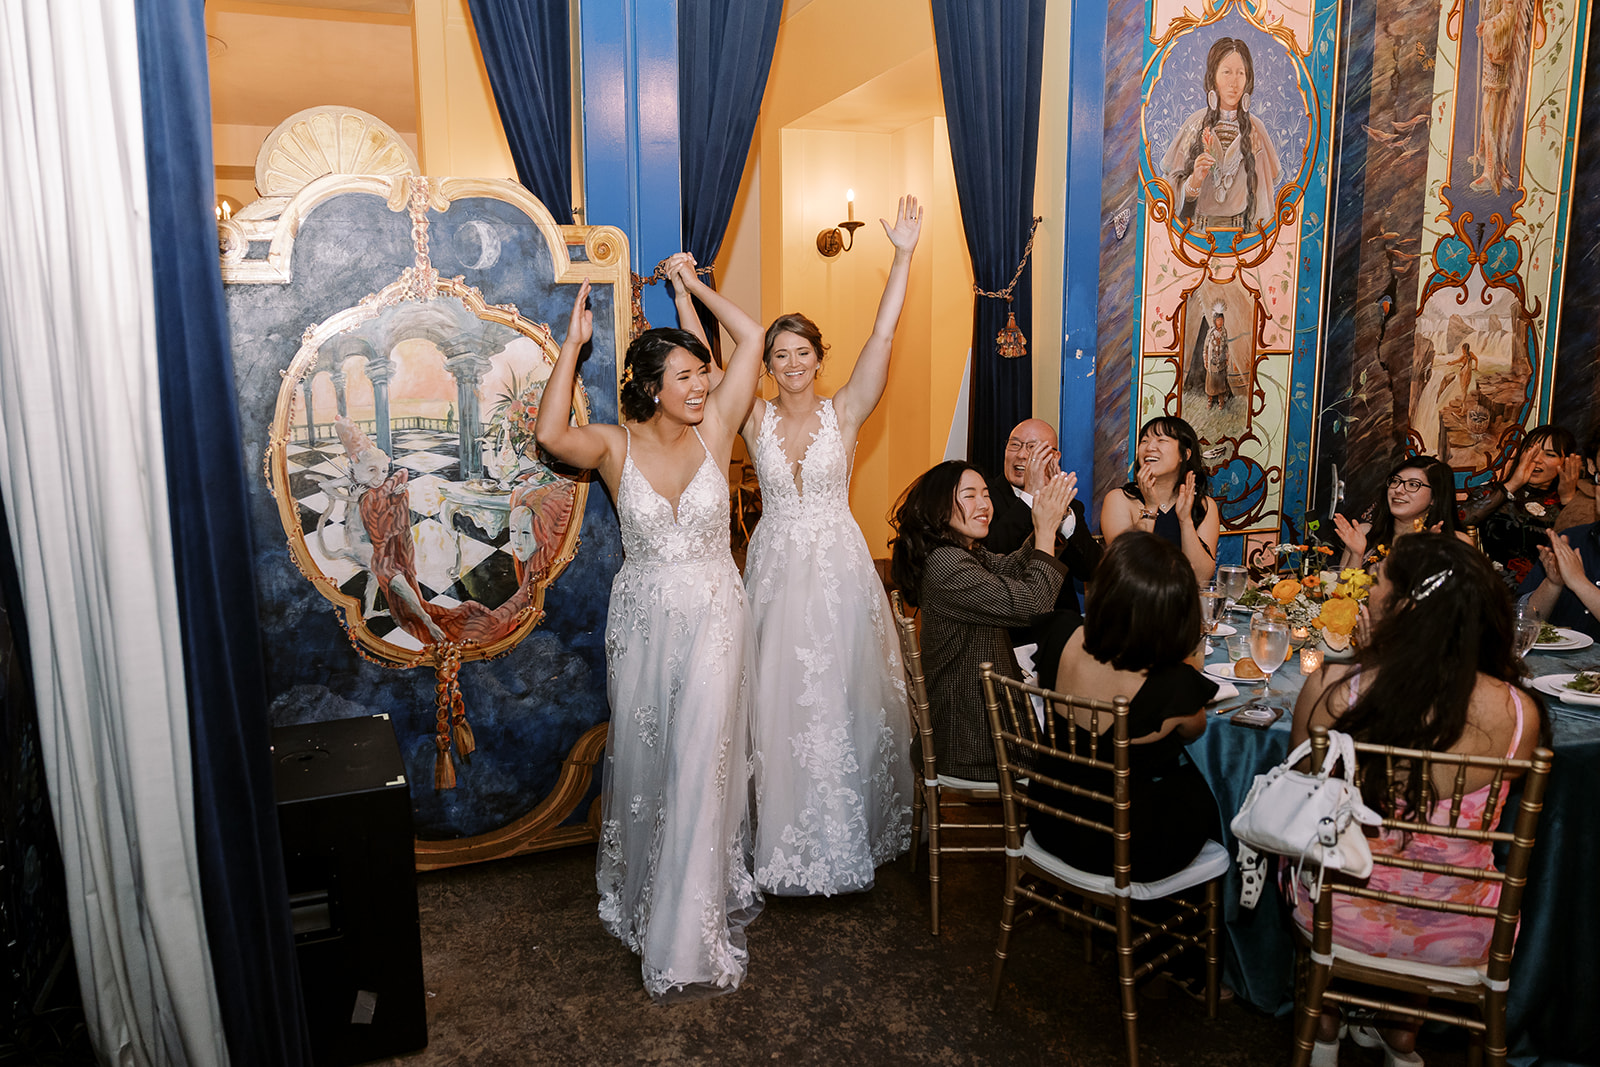 two brides enter reception, arms raised in cheer